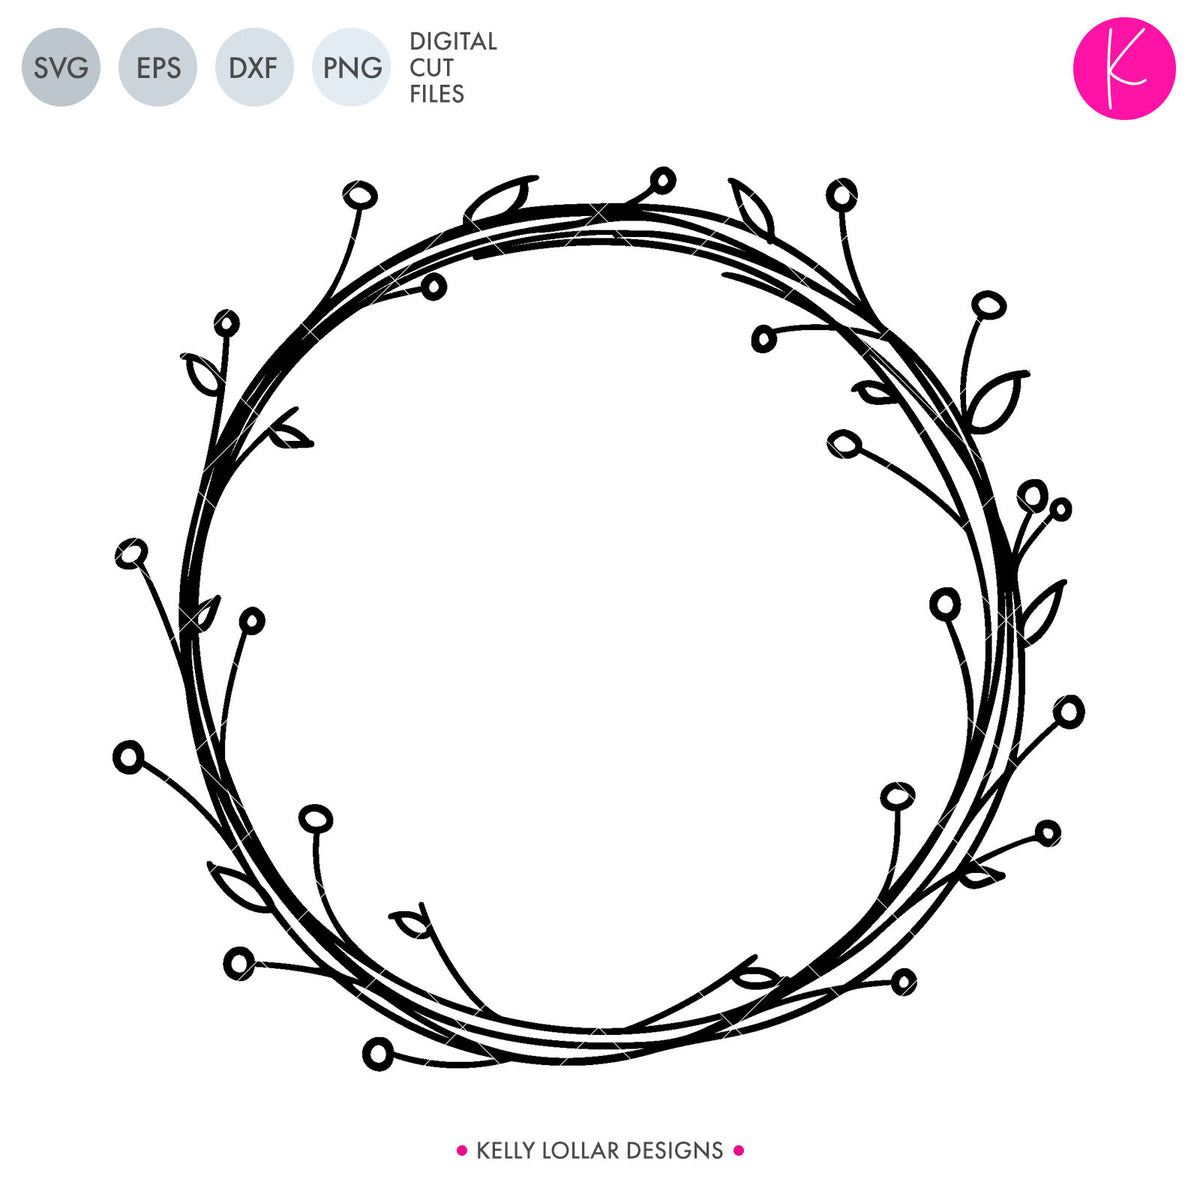 Wreath | SVG DXF EPS PNG Cut Files